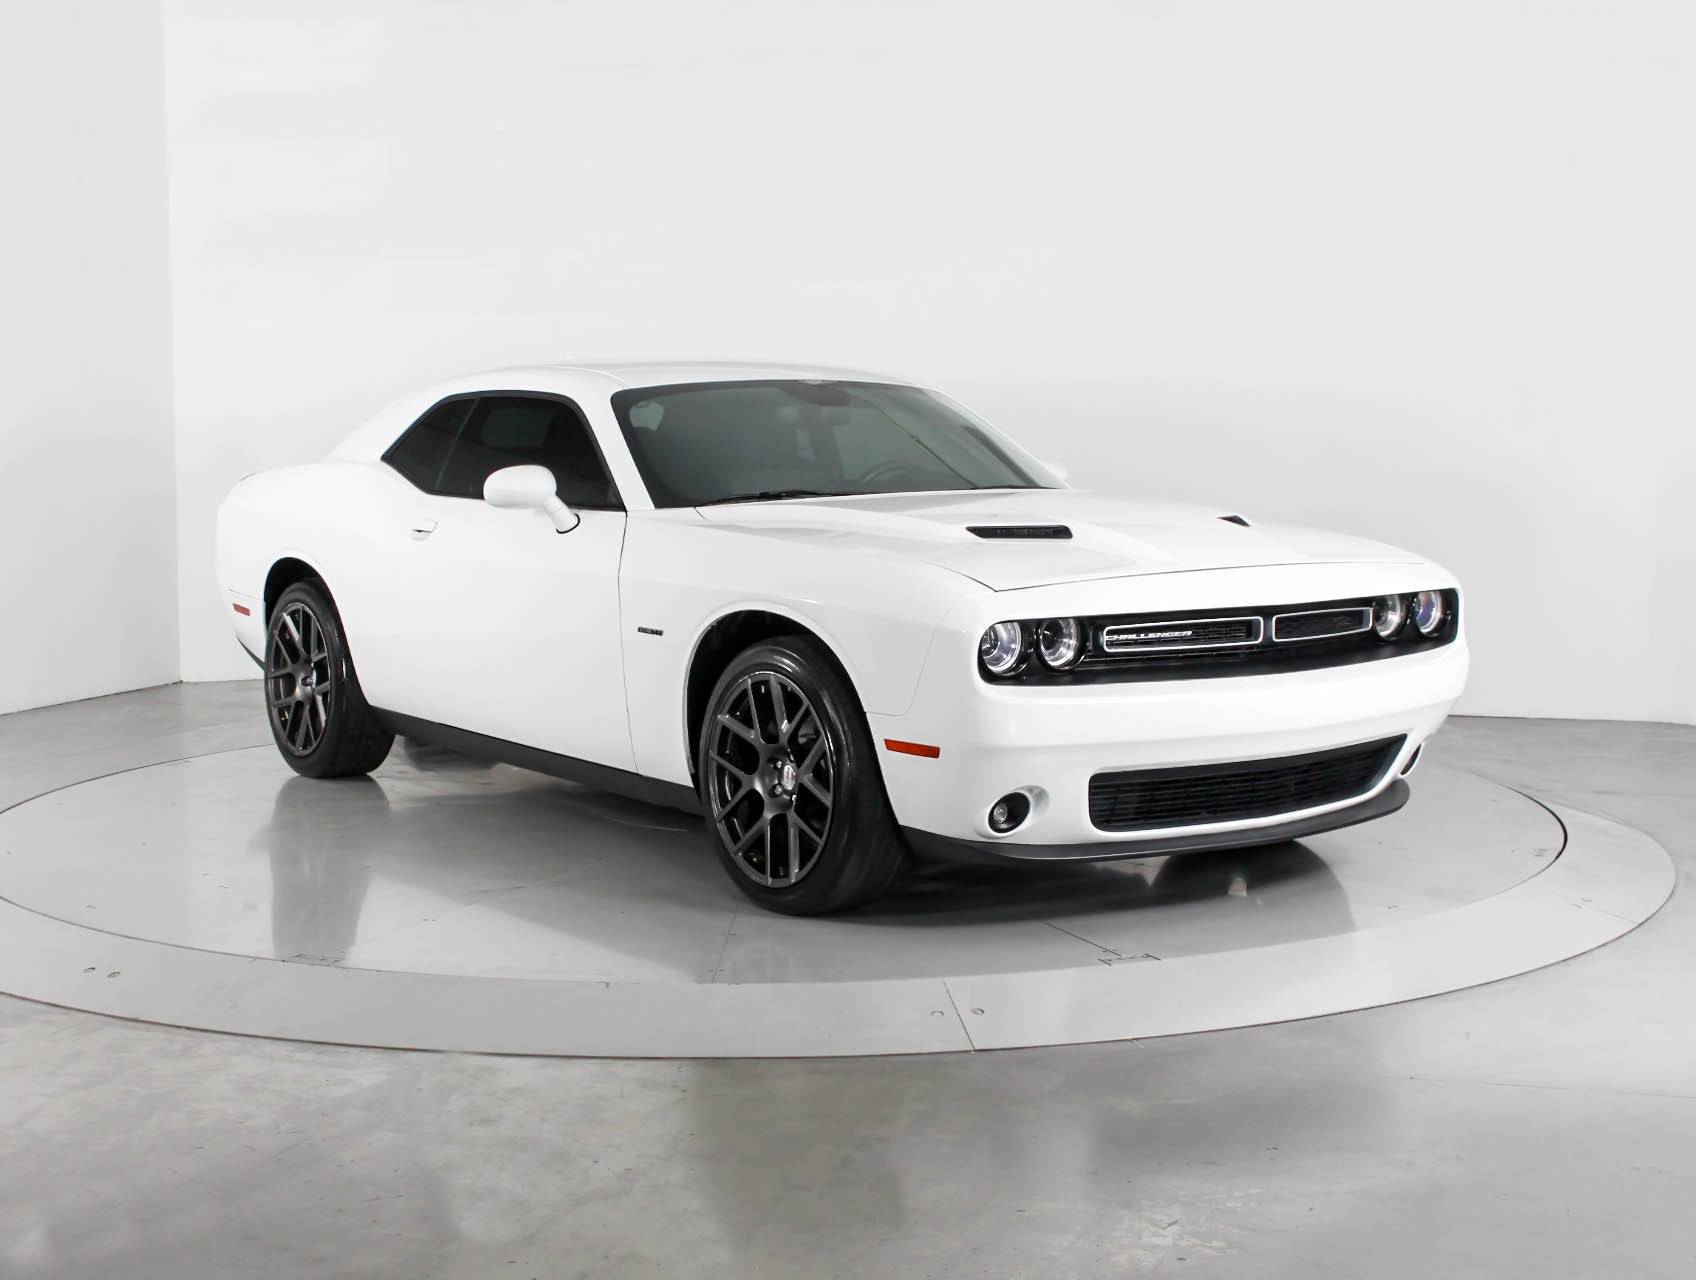 Florida Fine Cars - Used DODGE CHALLENGER 2016 HOLLYWOOD R/t